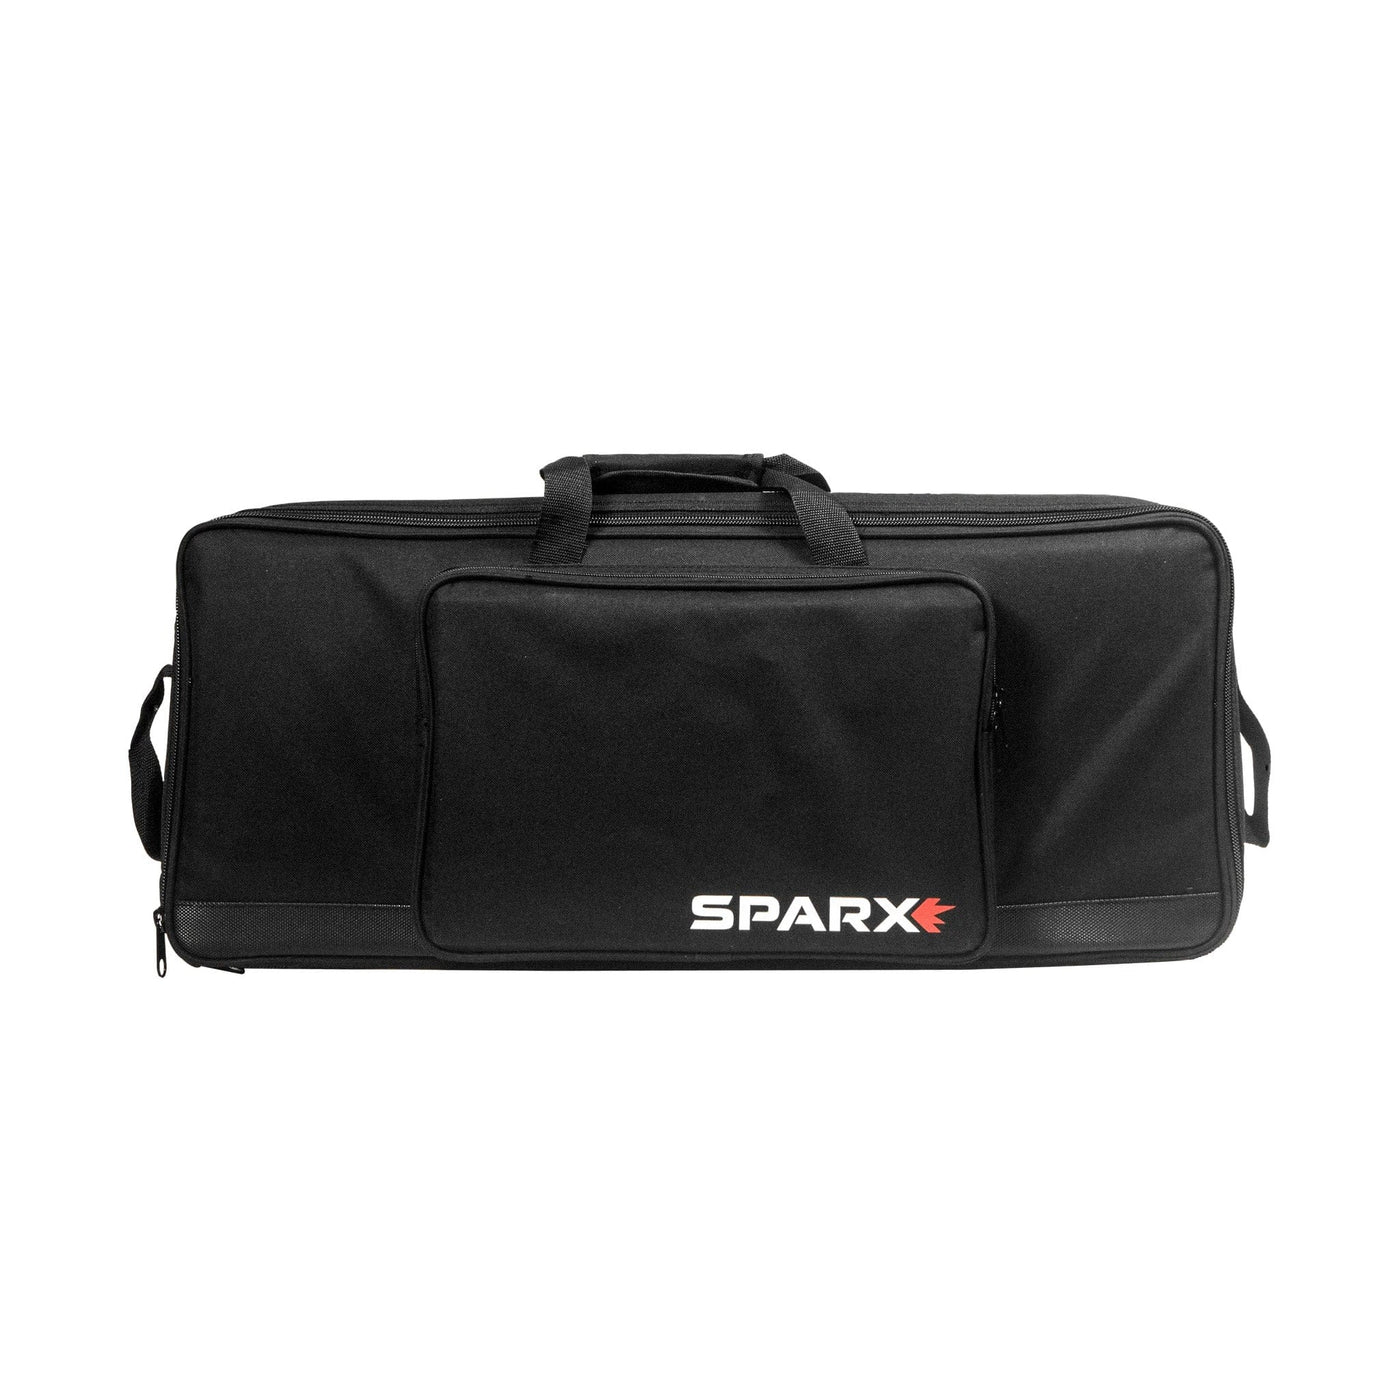 Sparx Soft Travel Case - The Hockey Shop Source For Sports